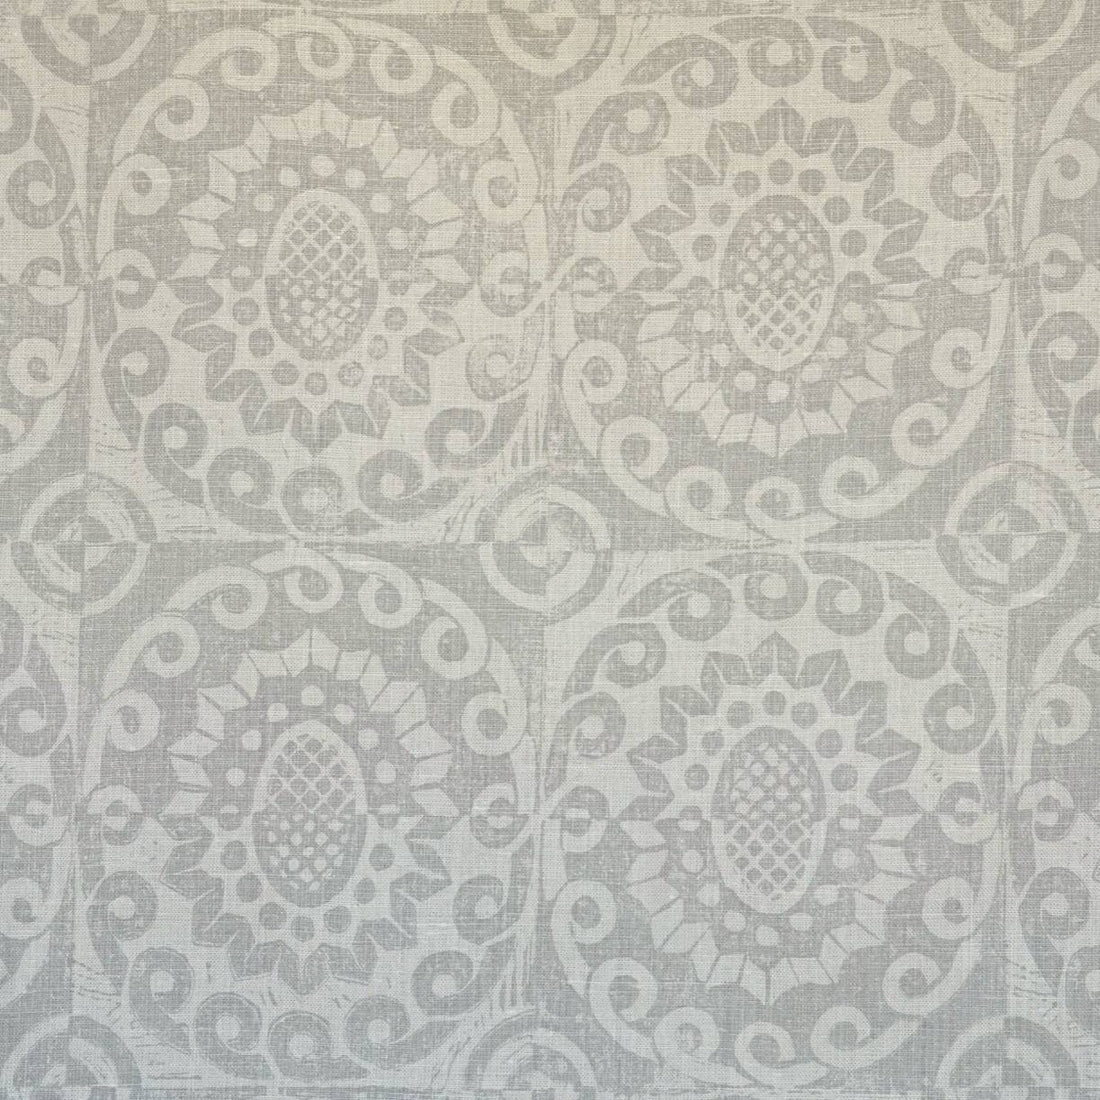 Pineapple On Oyster fabric in pale taupe color - pattern BFC-3623.1.0 - by Lee Jofa in the Blithfield collection